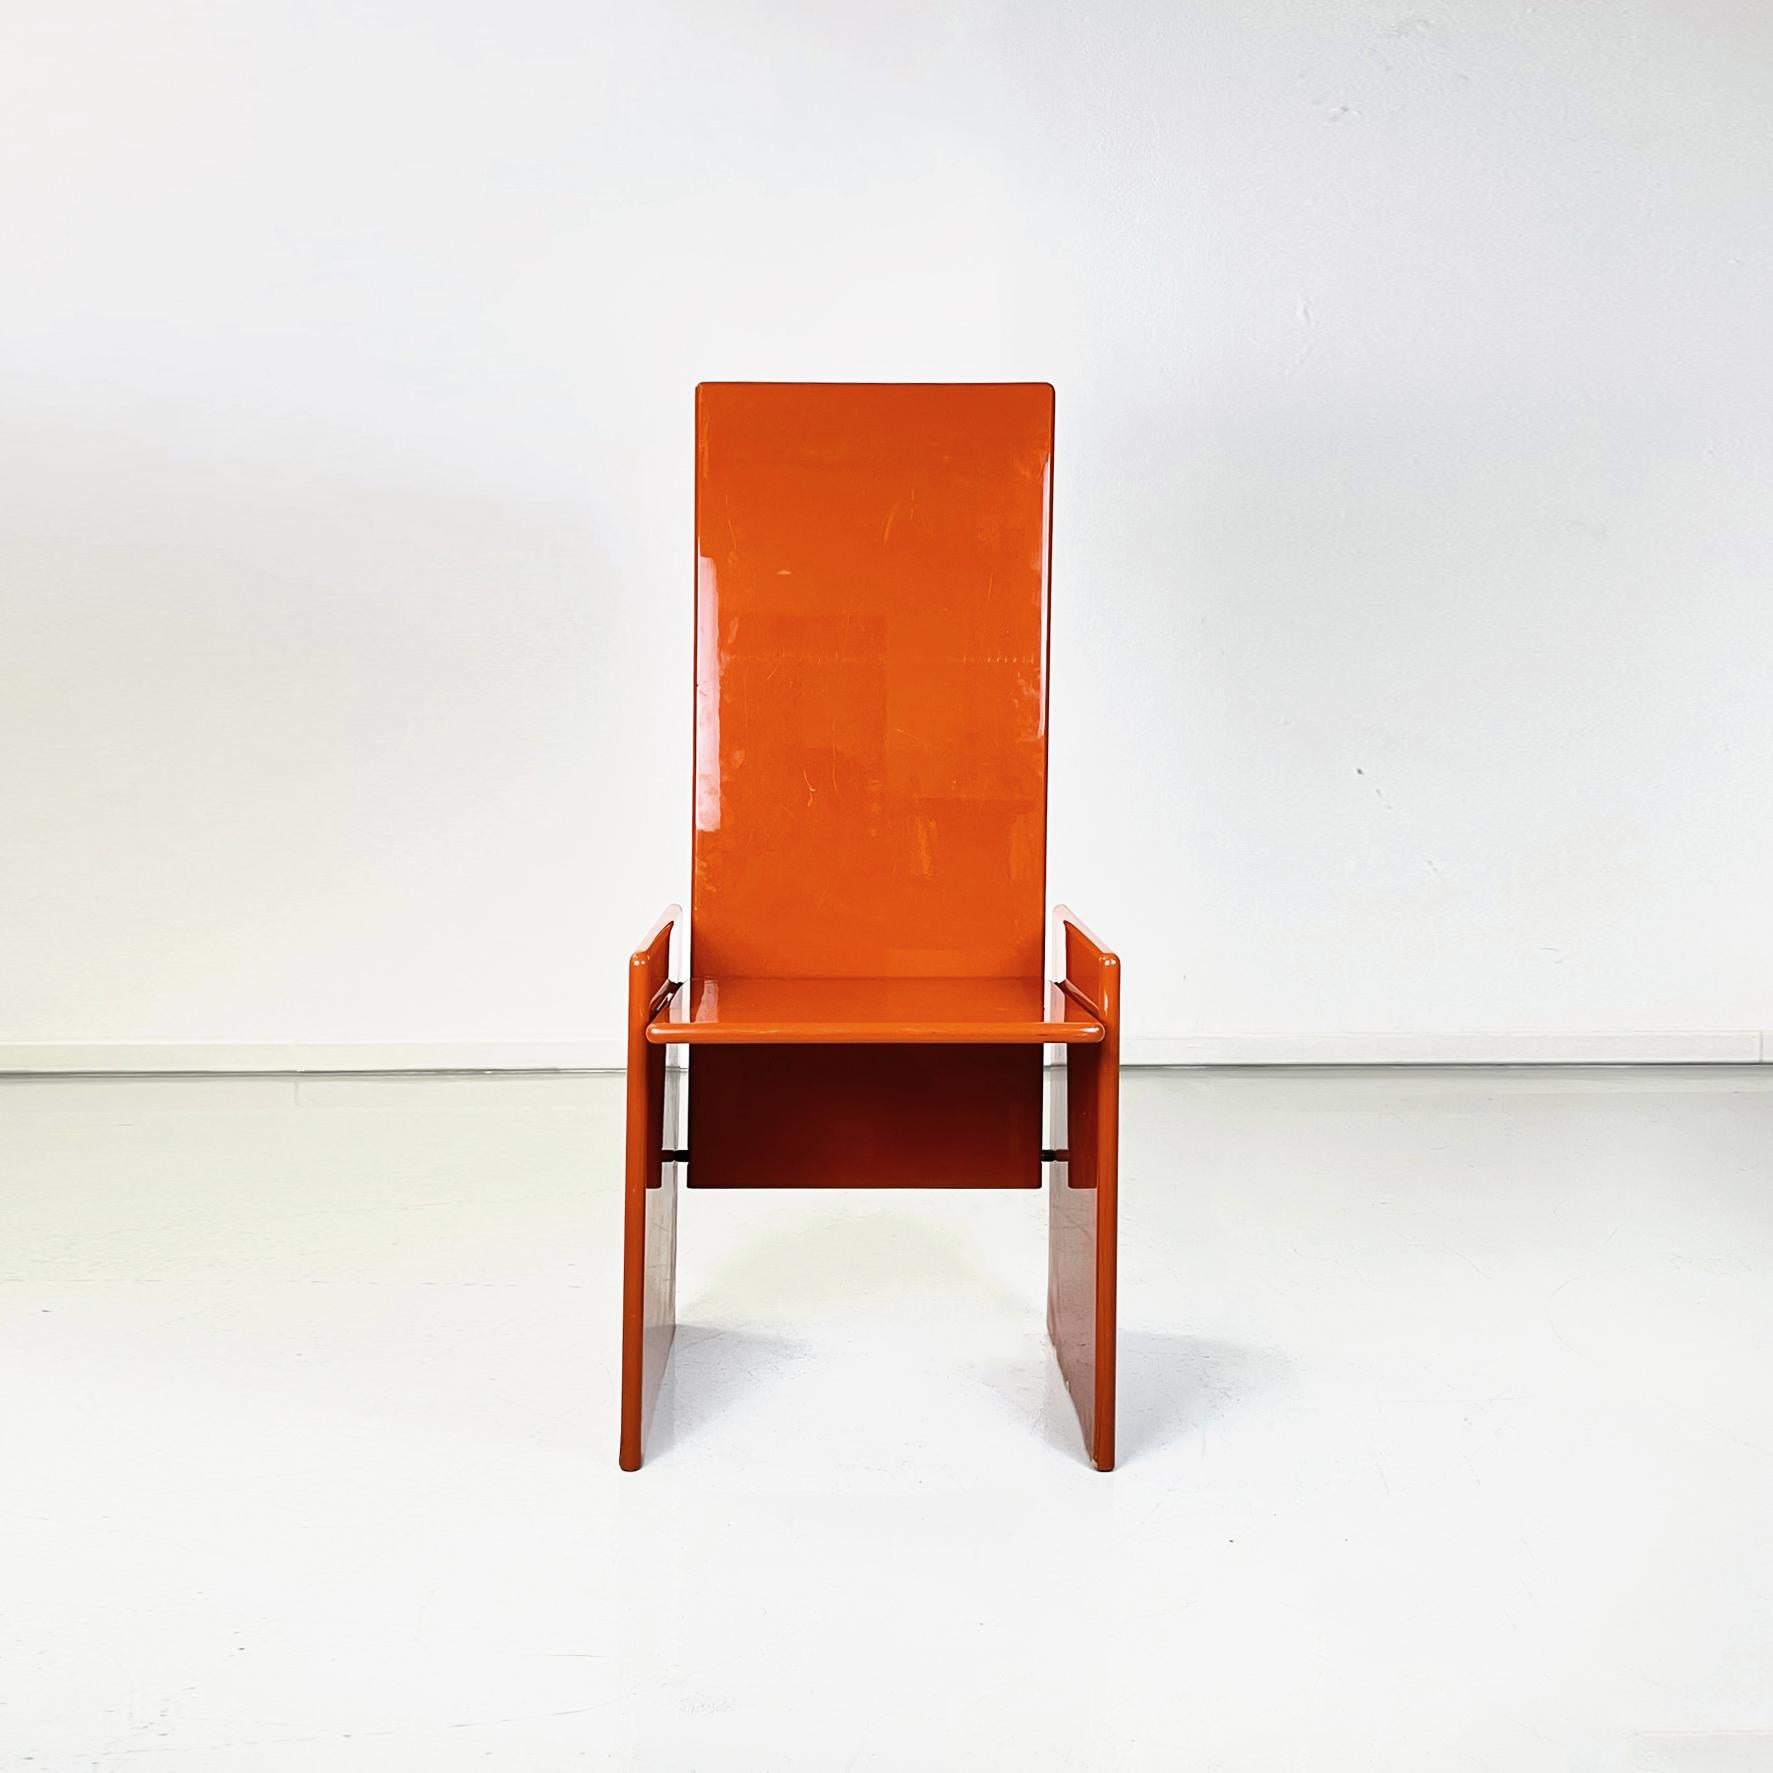 Italian modern Red wood chair mod. Kazuki by Kazuhide Takahama for Simone Gavina, 1960s
Armchair mod. Kazuki in glossy red lacquered wood. The back is slightly inclined and the seat are rectangular with rounded corners. The two legs that support